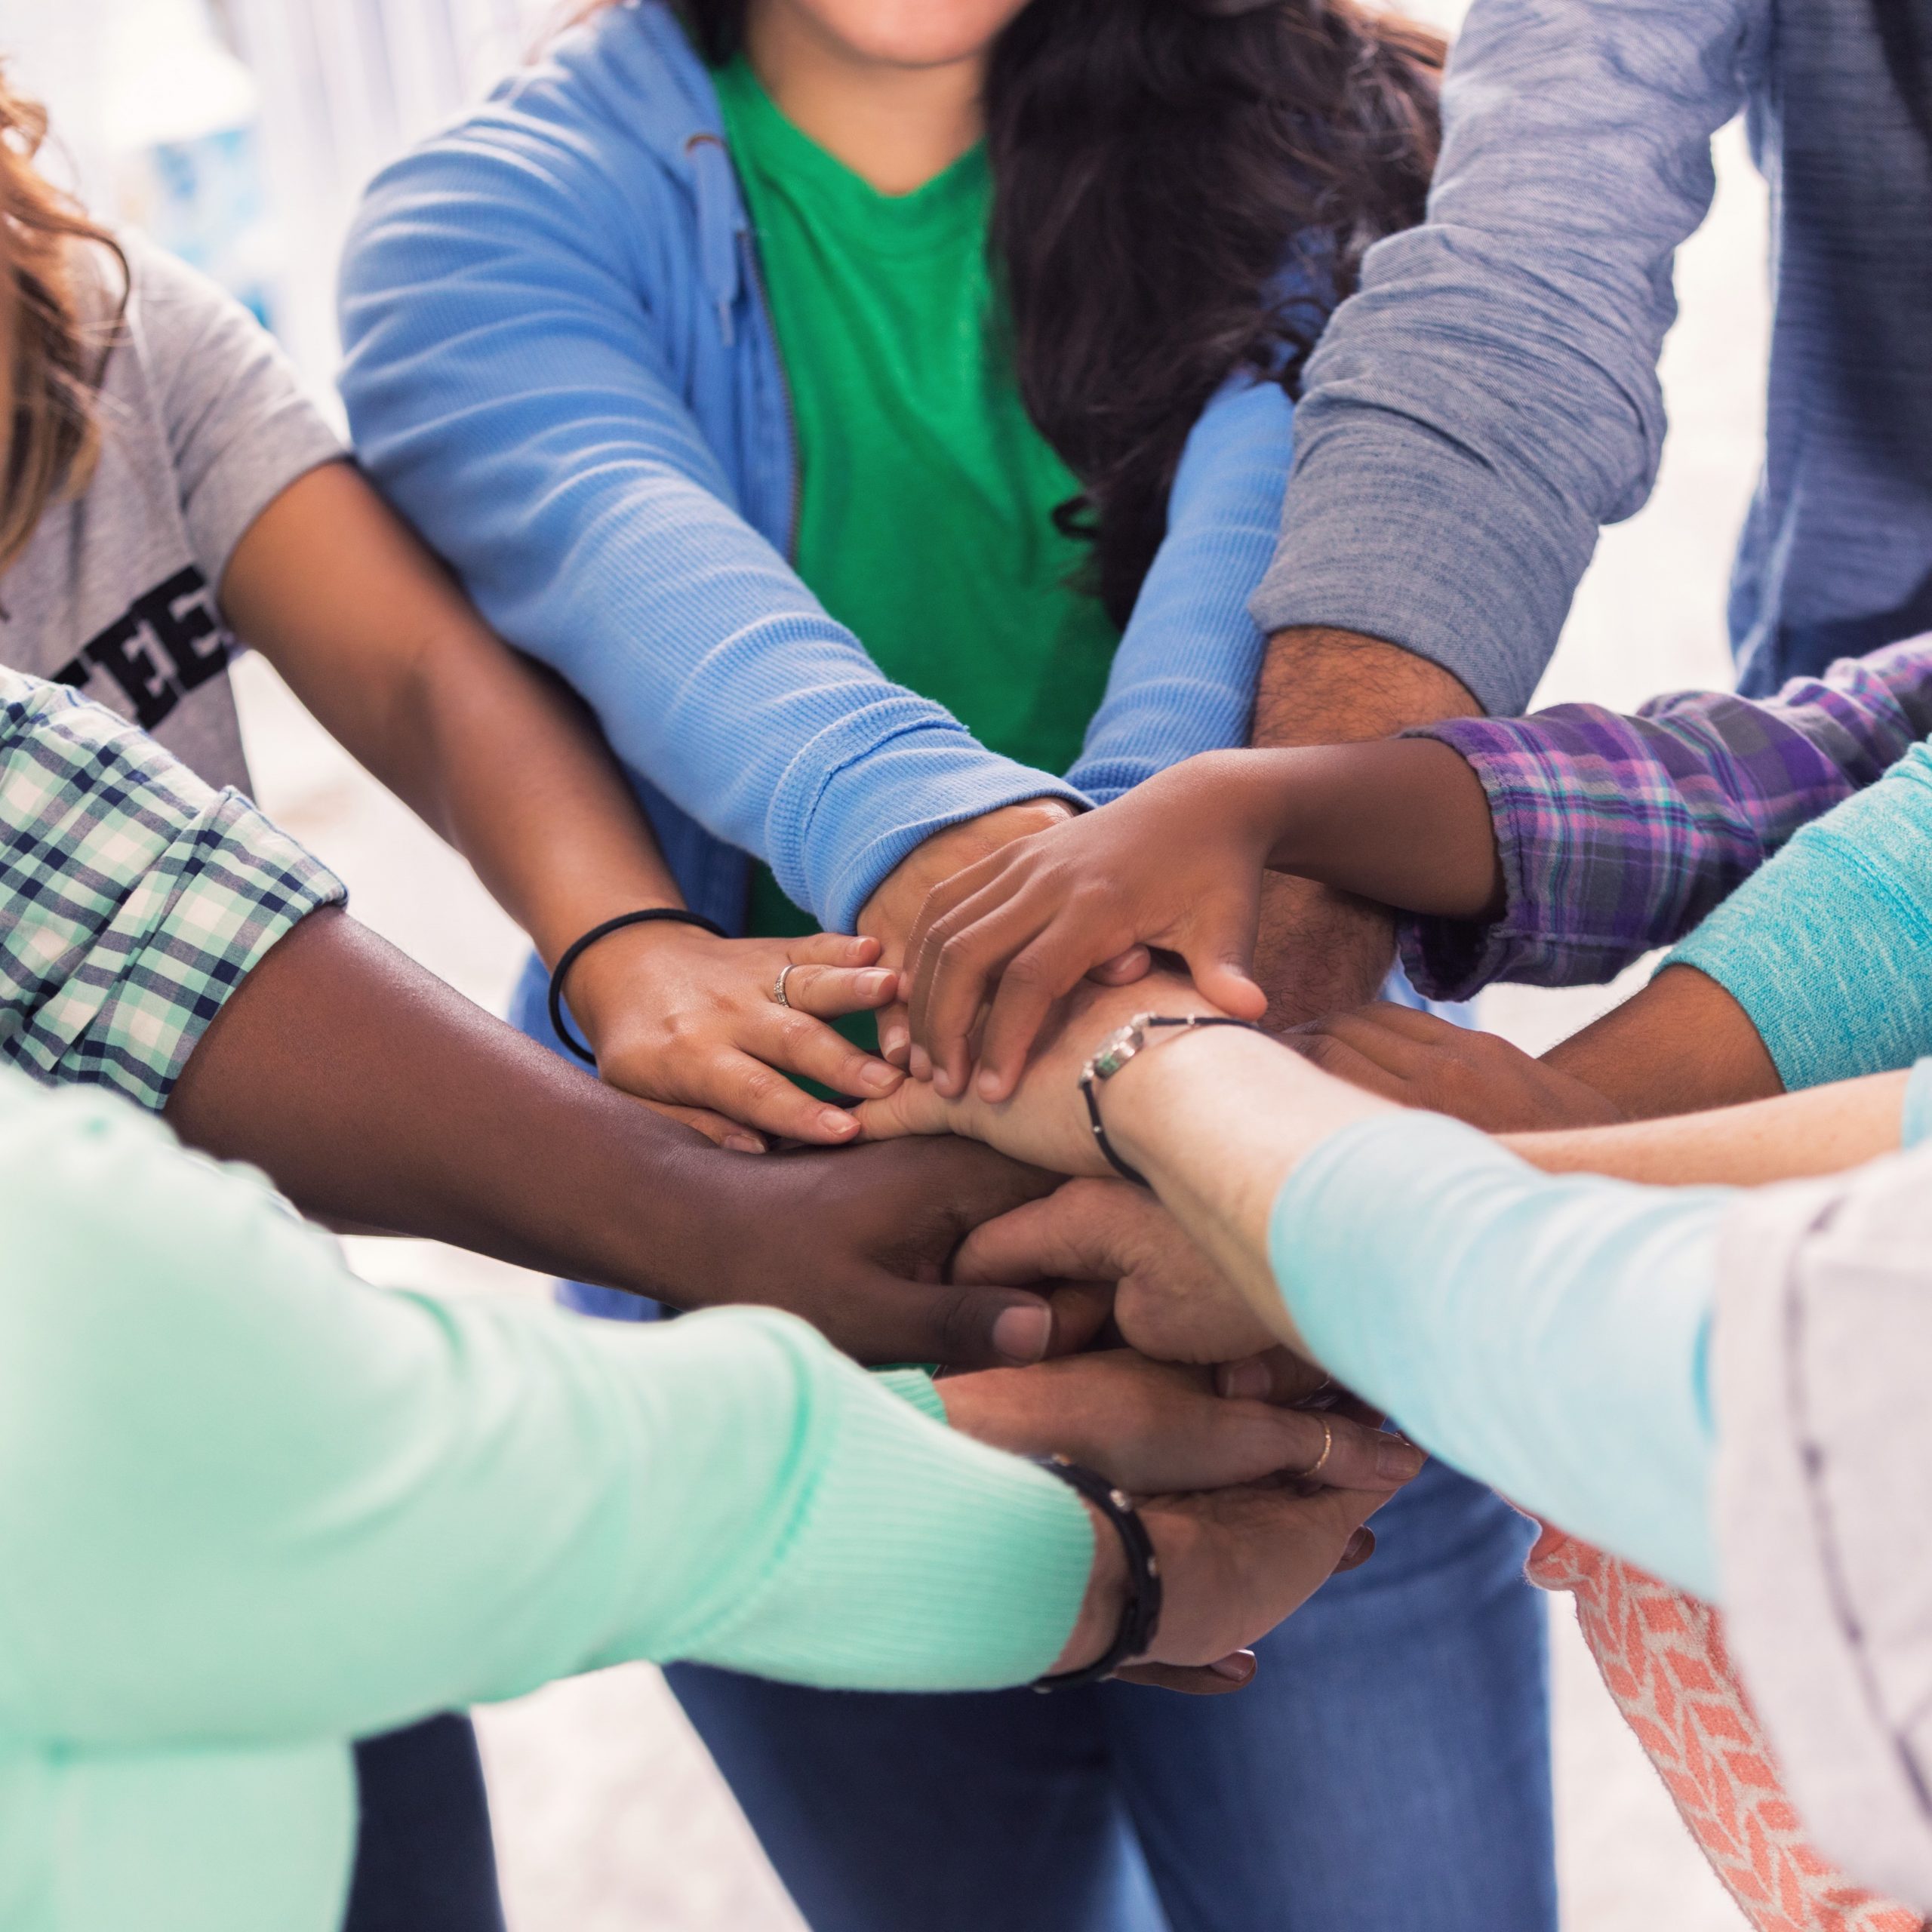 Diverse group of people with hands together in a circle